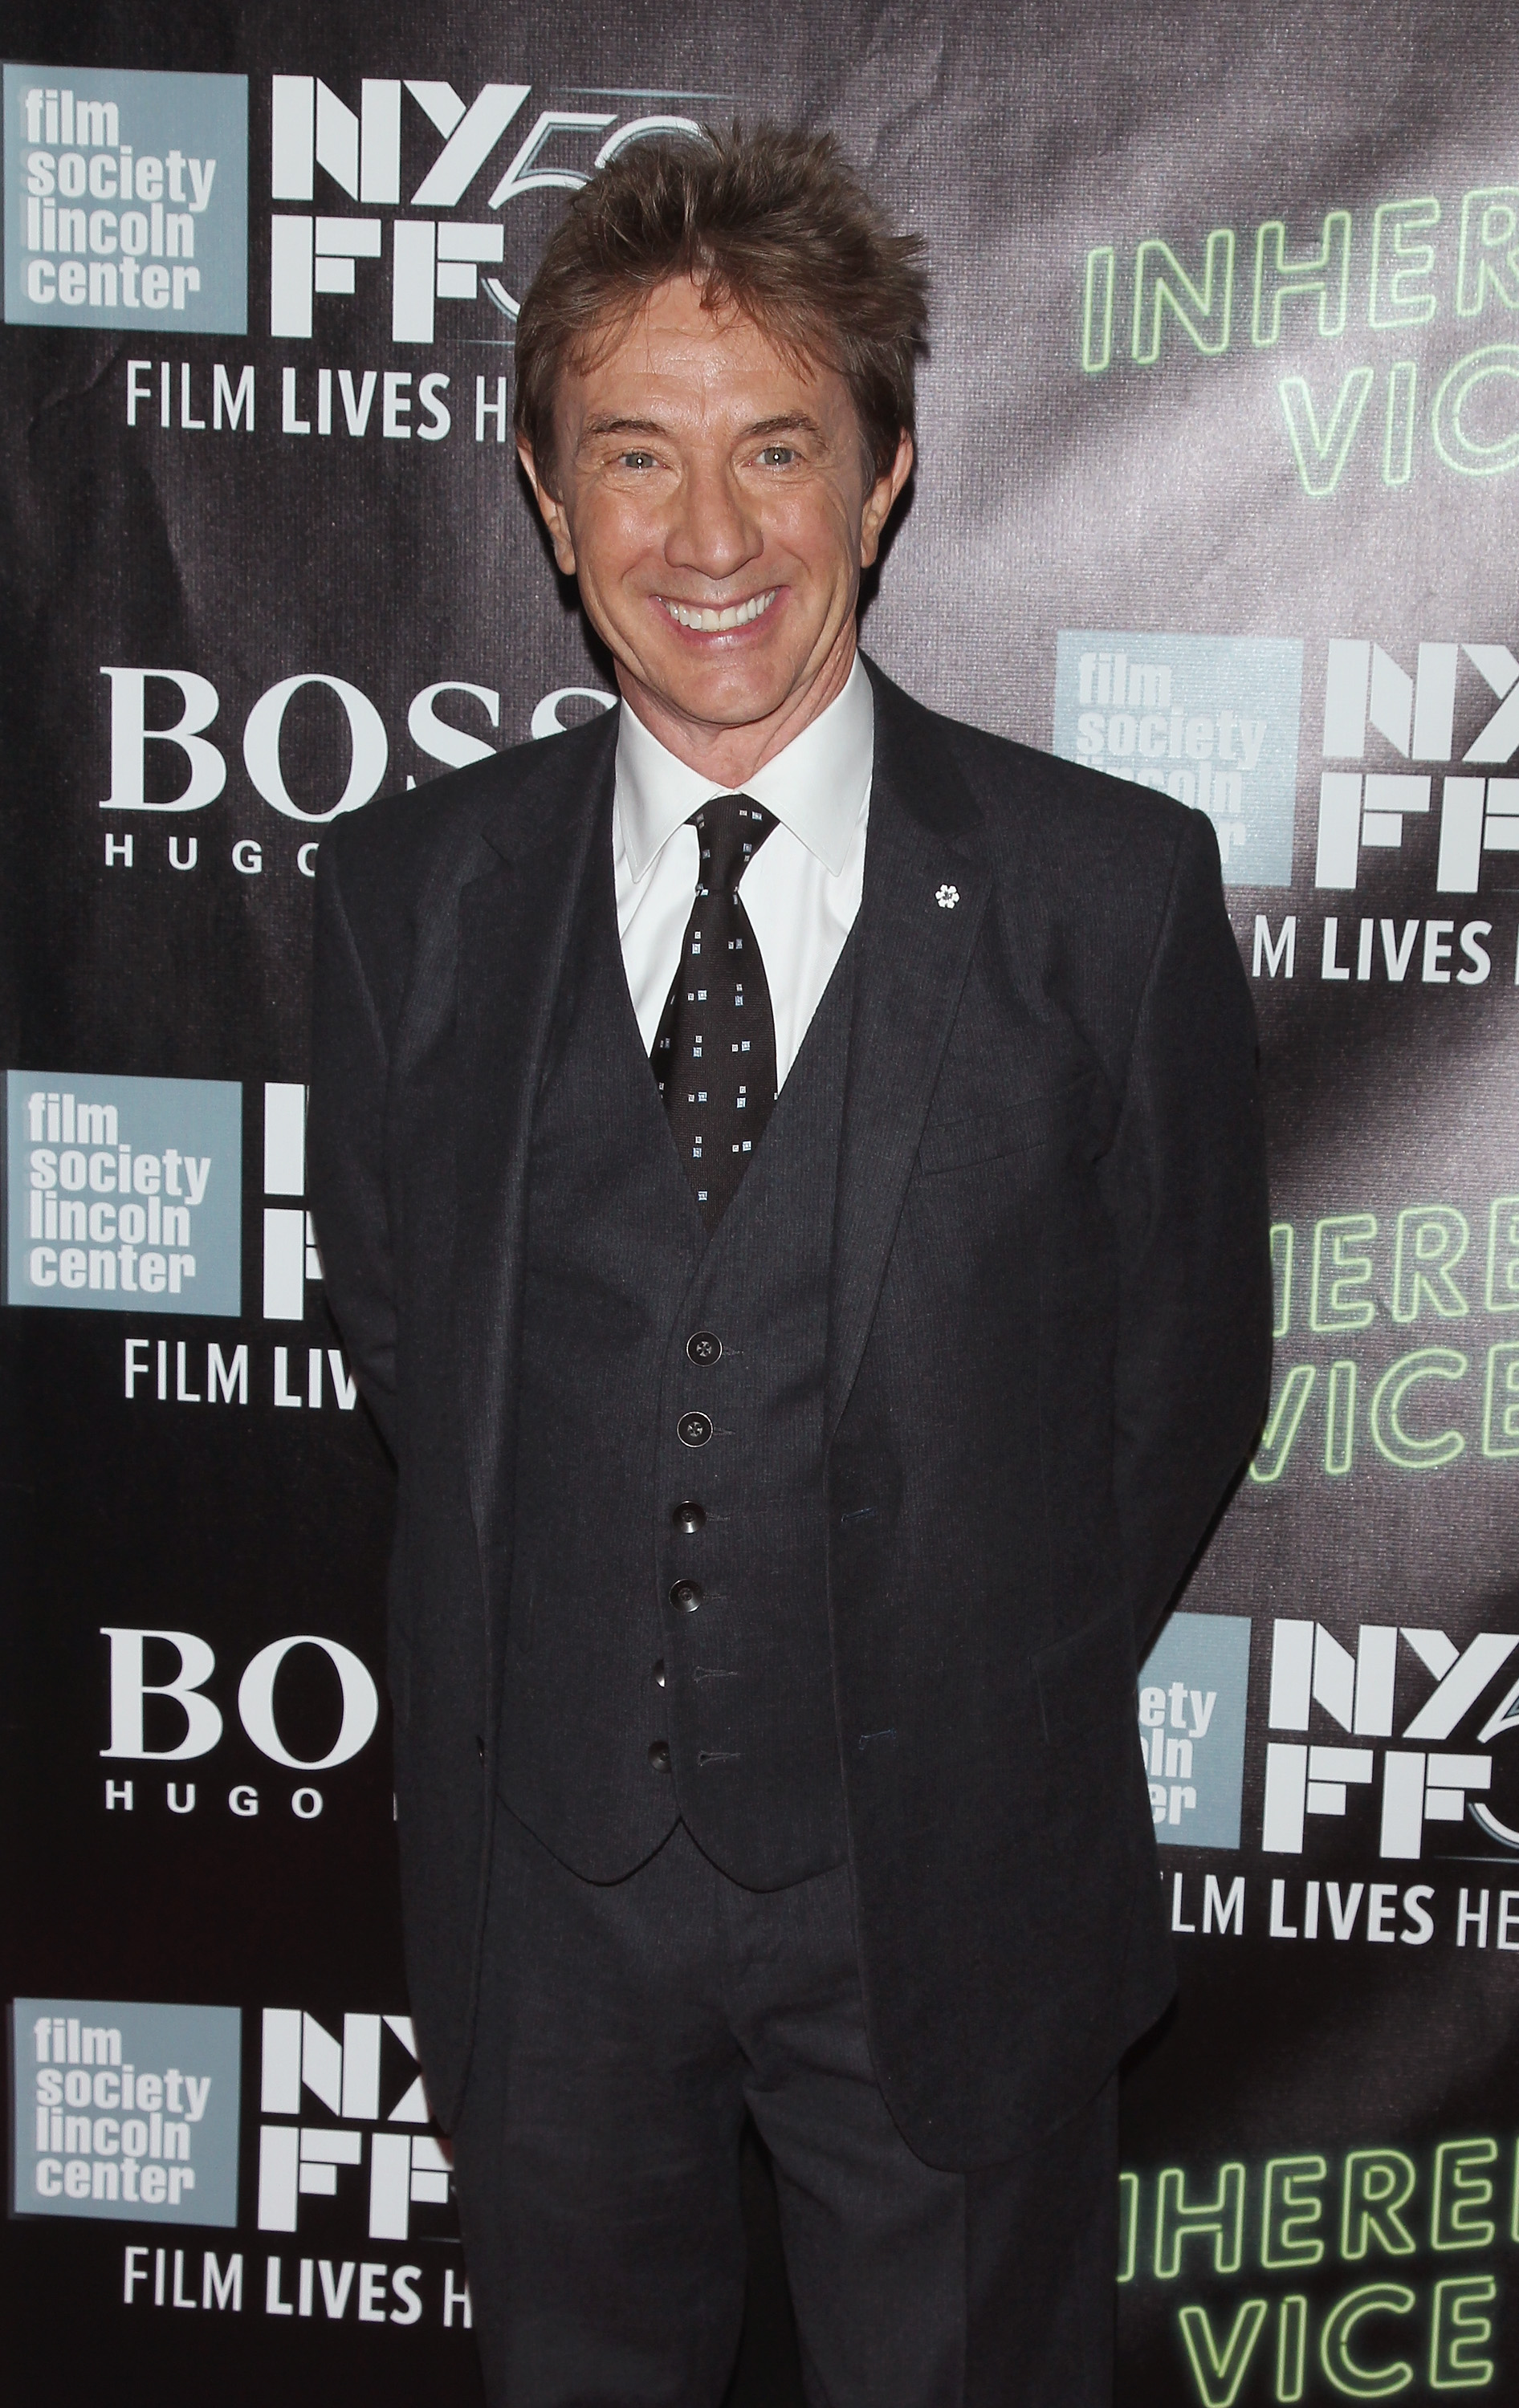 Actor Martin Short during the 52nd New York Film Festival on October 4, 2014 in New York City.